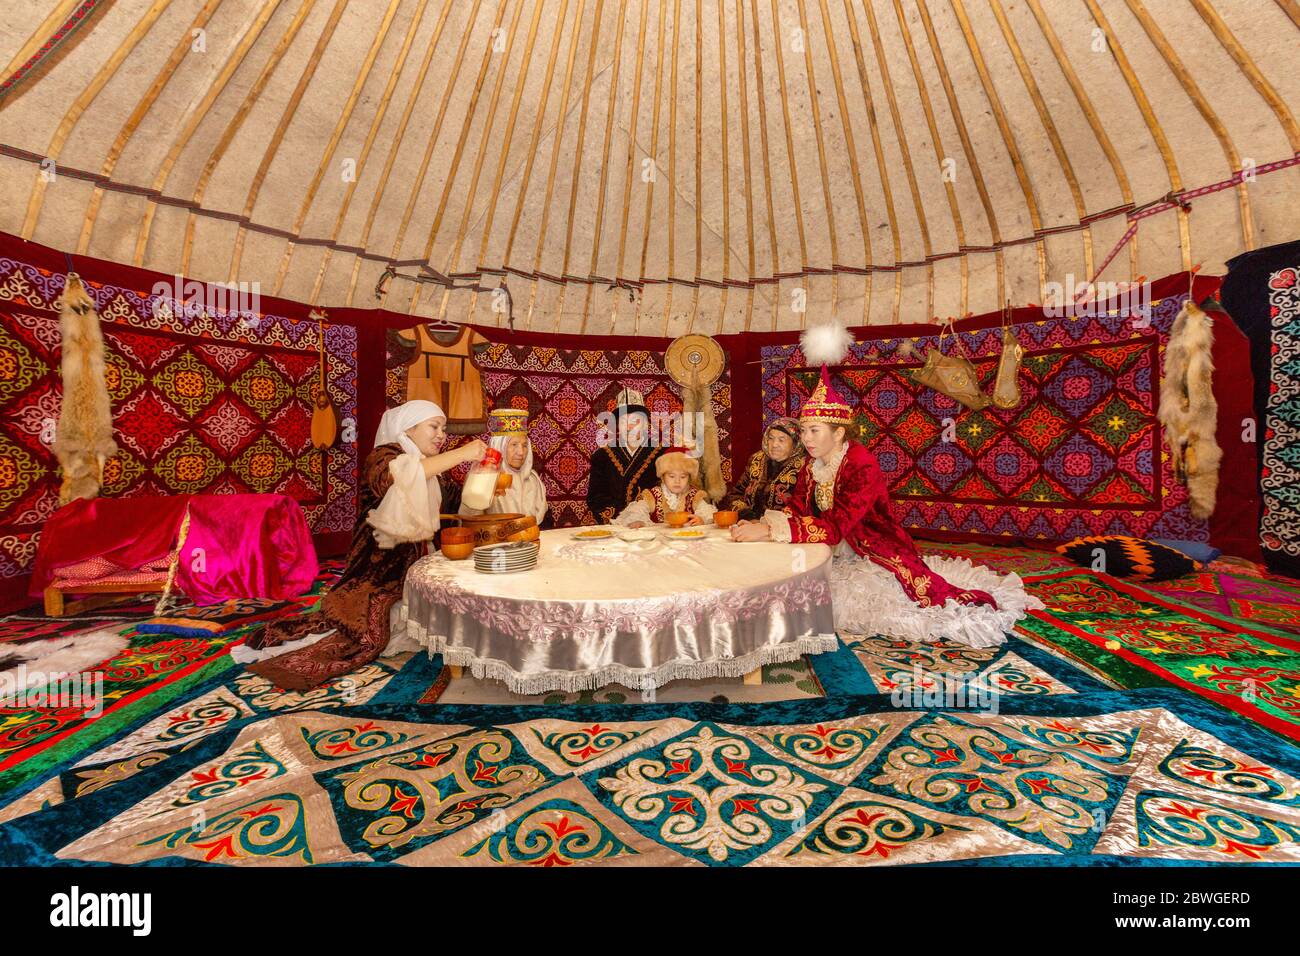 Kazakh people in traditional costumes in a nomadic tent known as yurt, drinking Kymyz, traditional drink made with horse milk, in Almaty, Kazakhstan Stock Photo